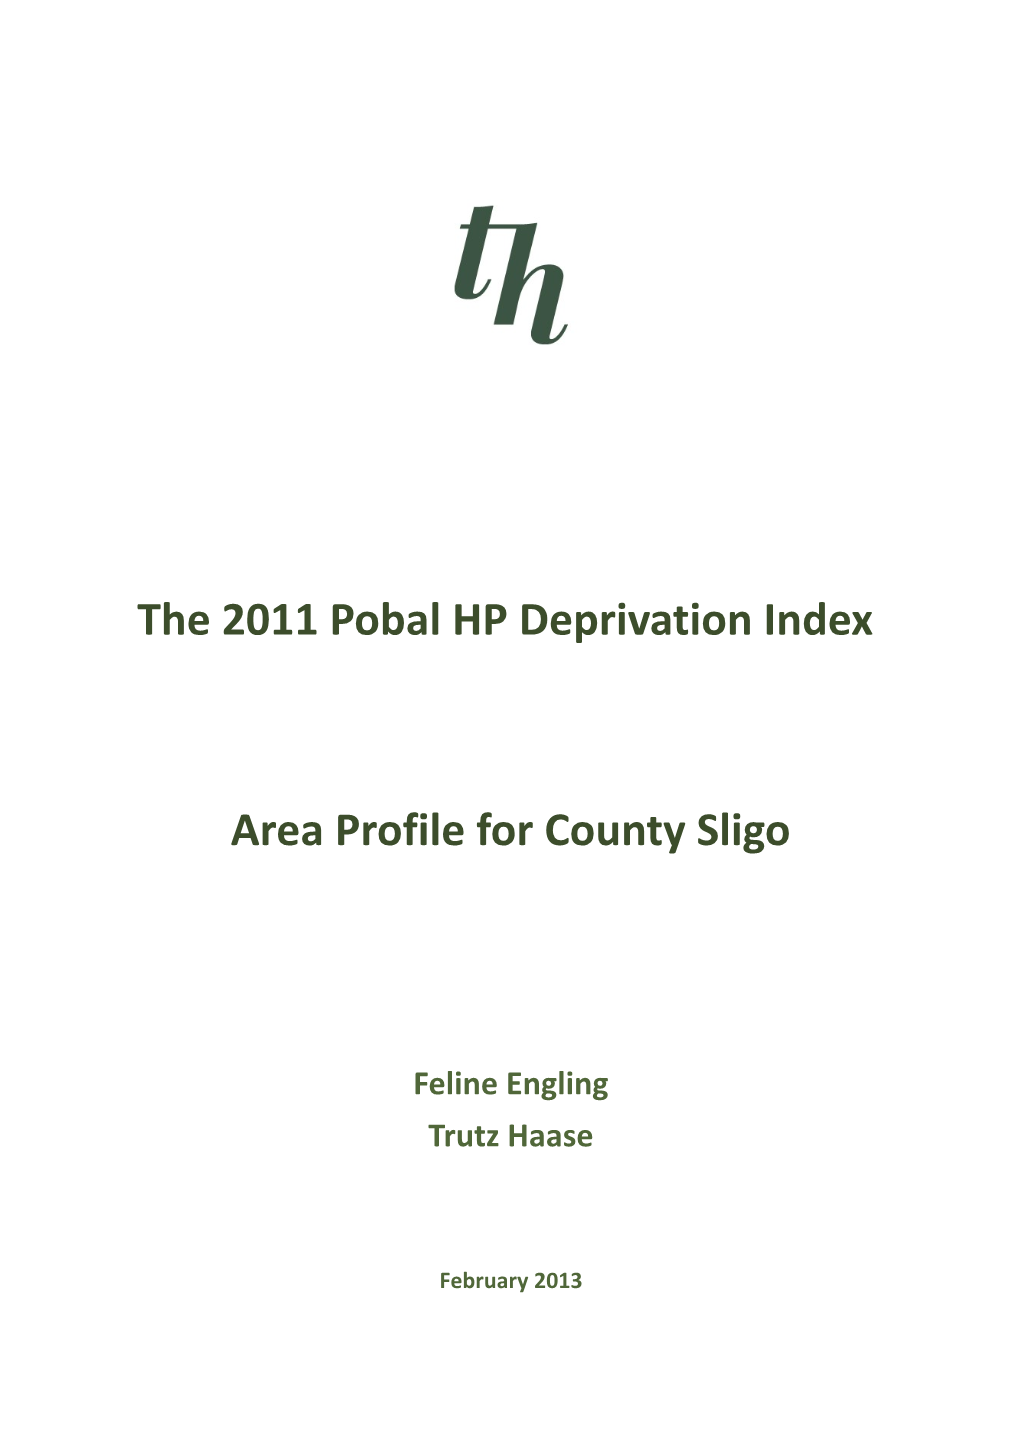 The 2011 Pobal HP Deprivation Index s1